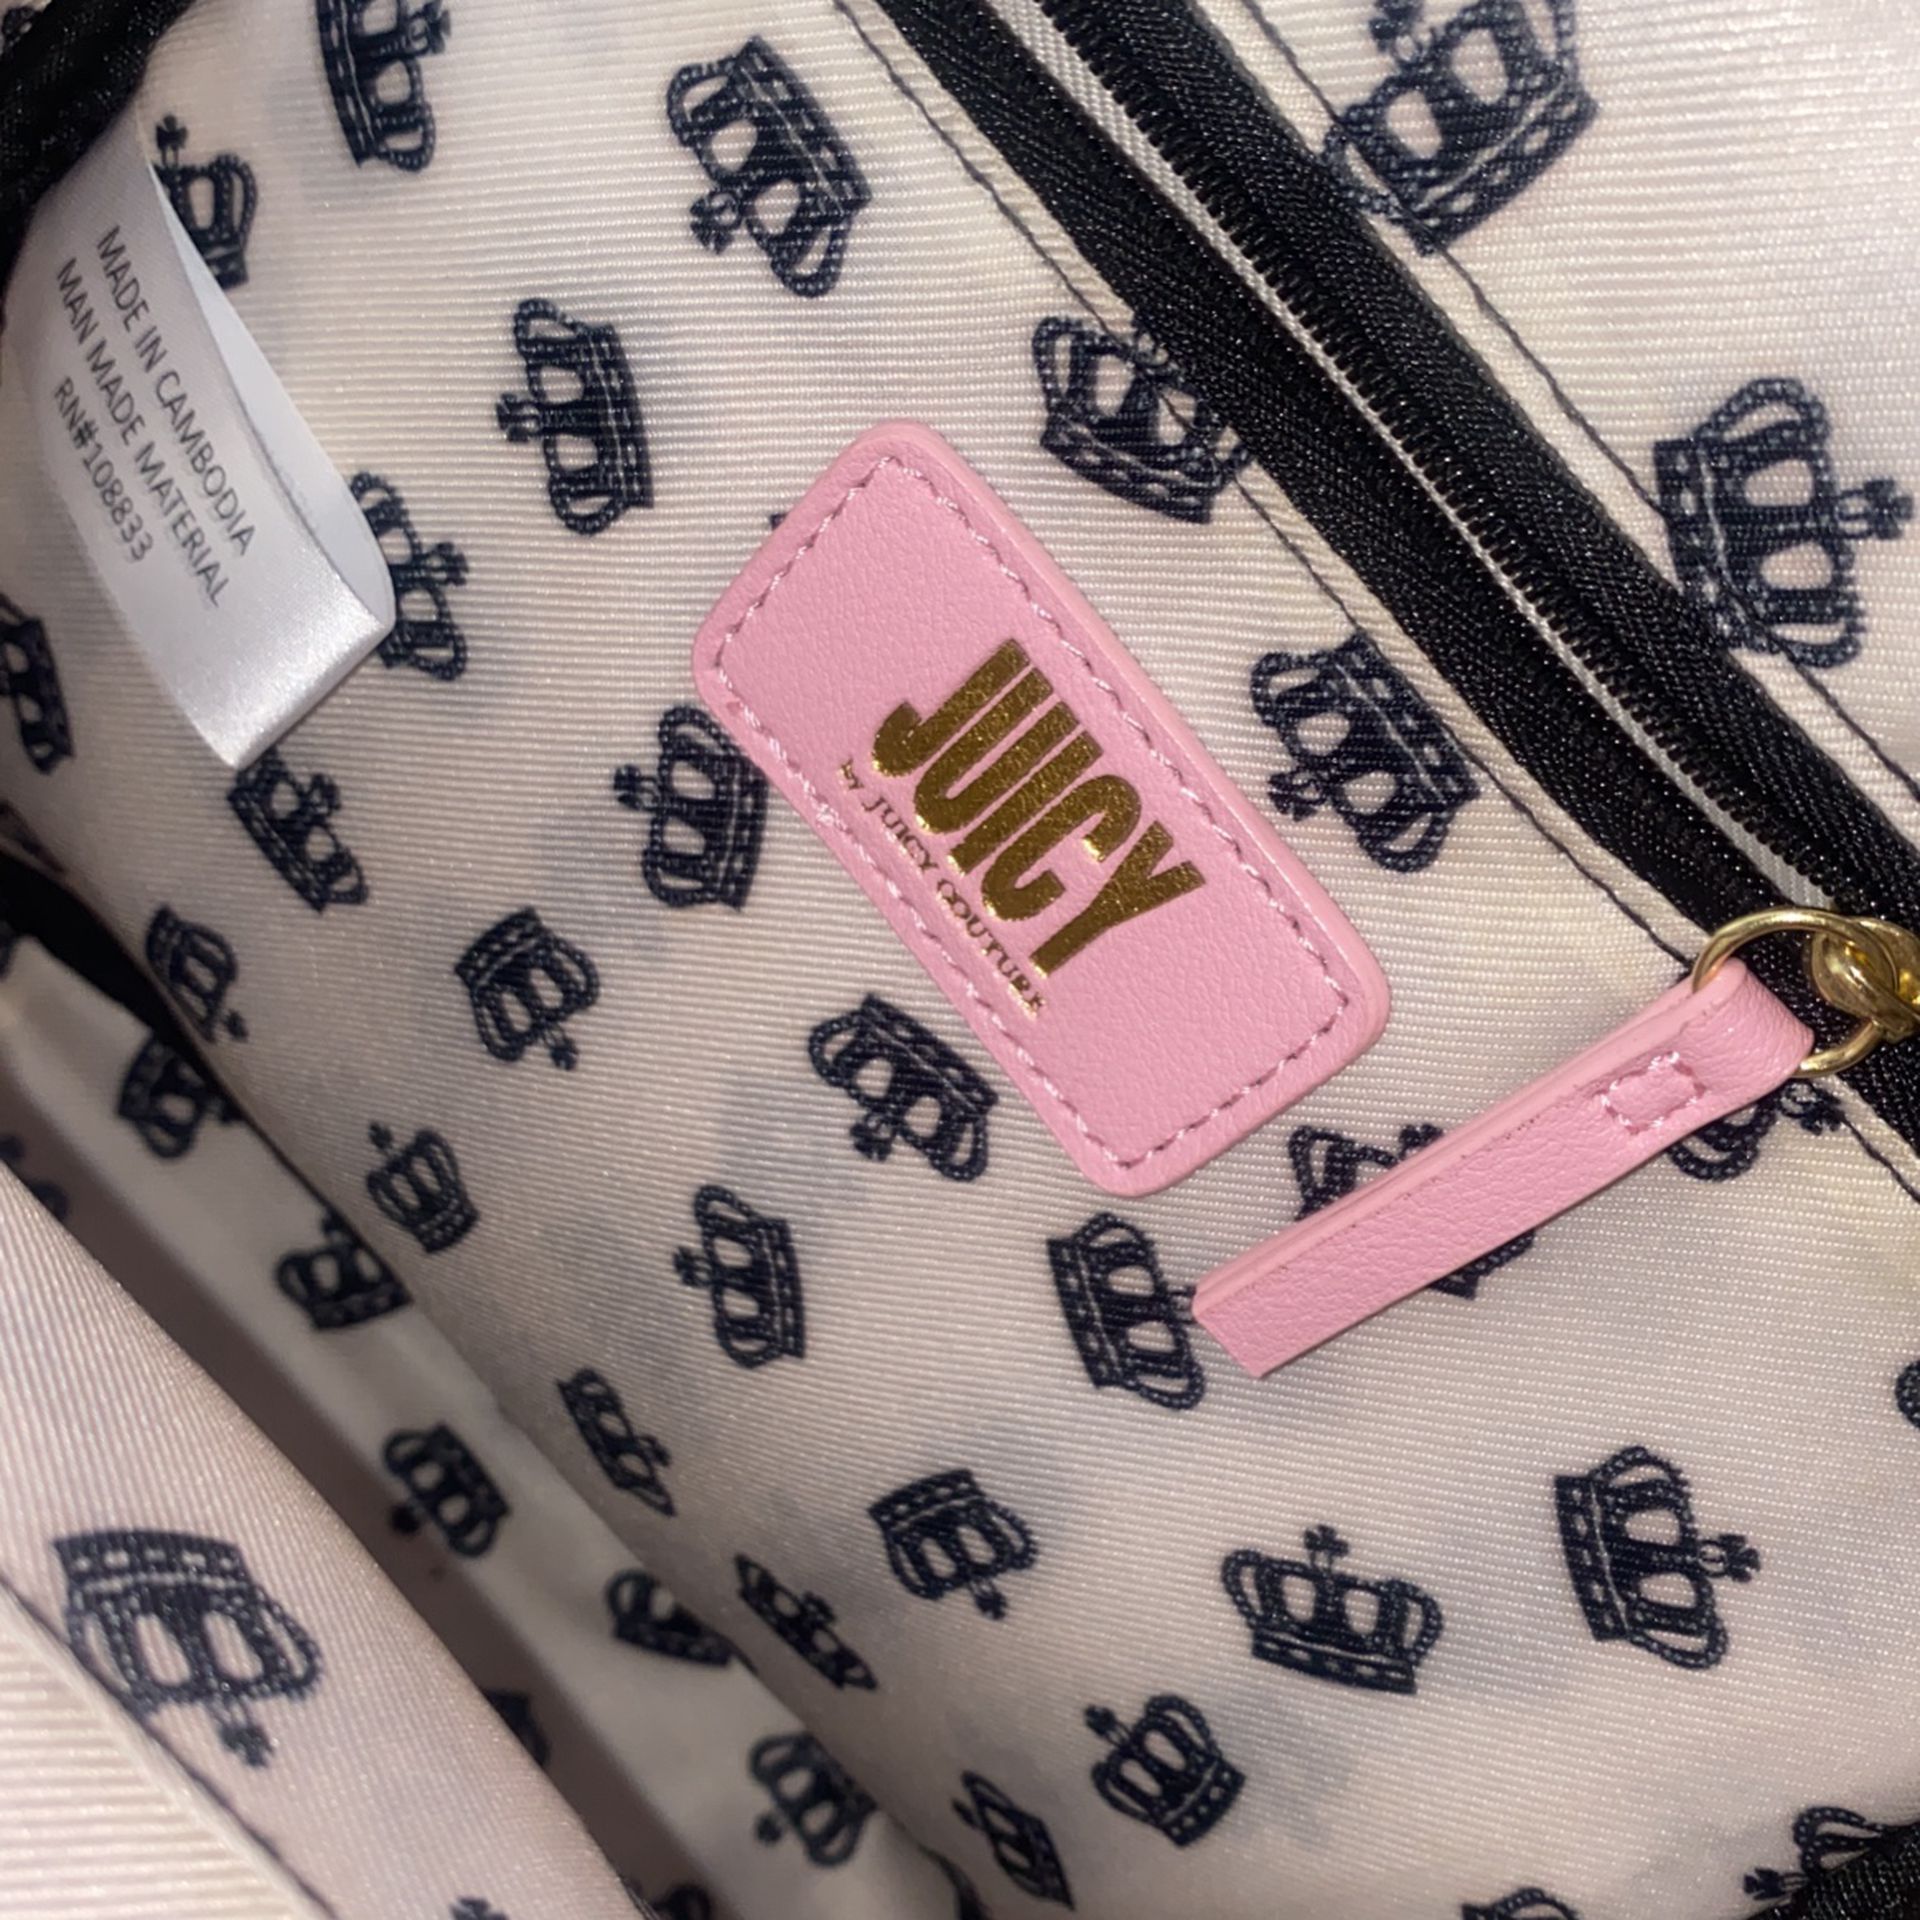 Juicy Couture Mini Backpack